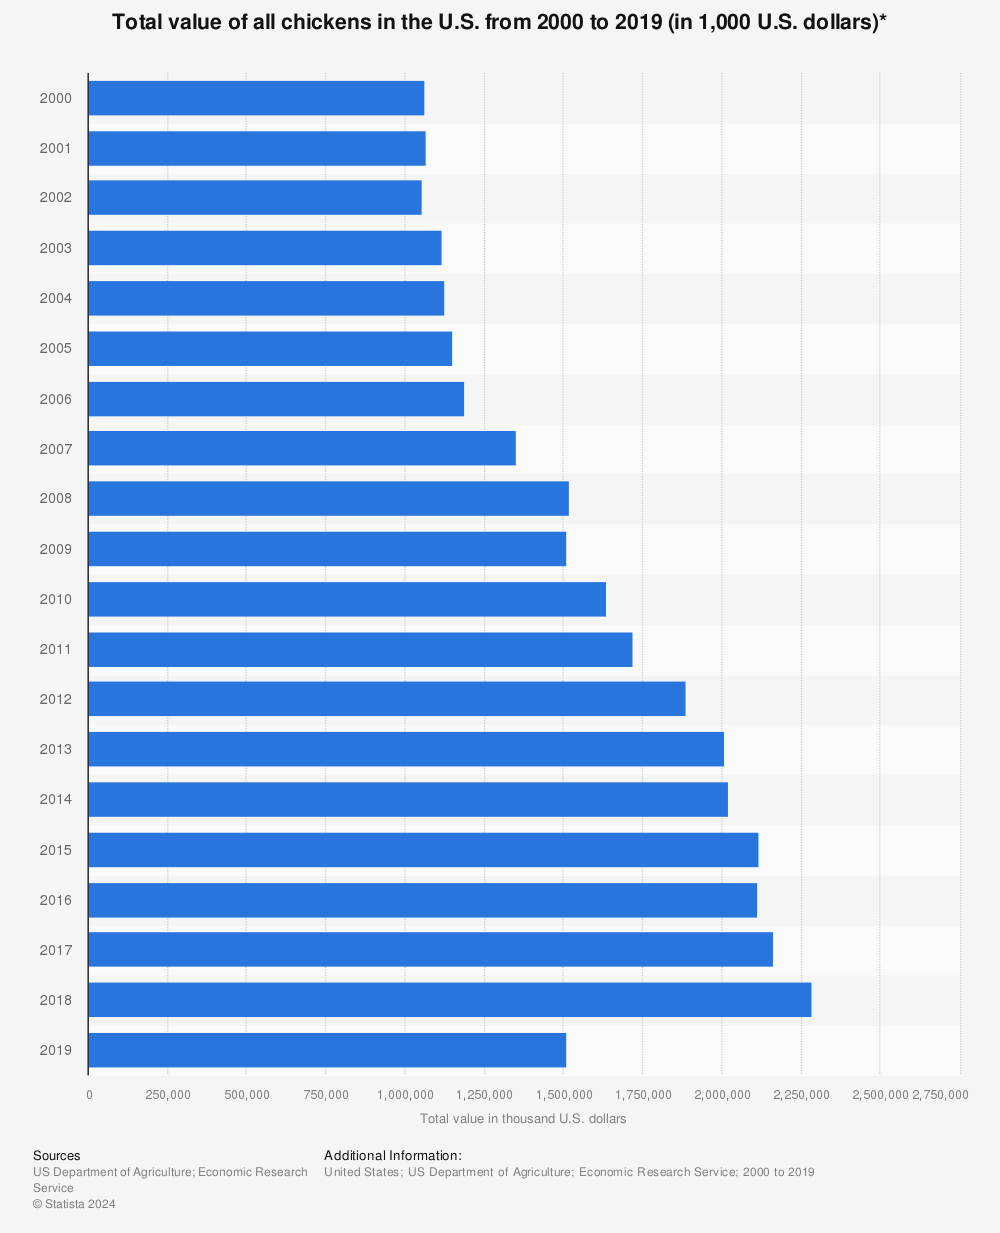 Statistic: Total value of all chickens in the U.S. from 2000 to 2019 (in 1,000 U.S. dollars)* | Statista